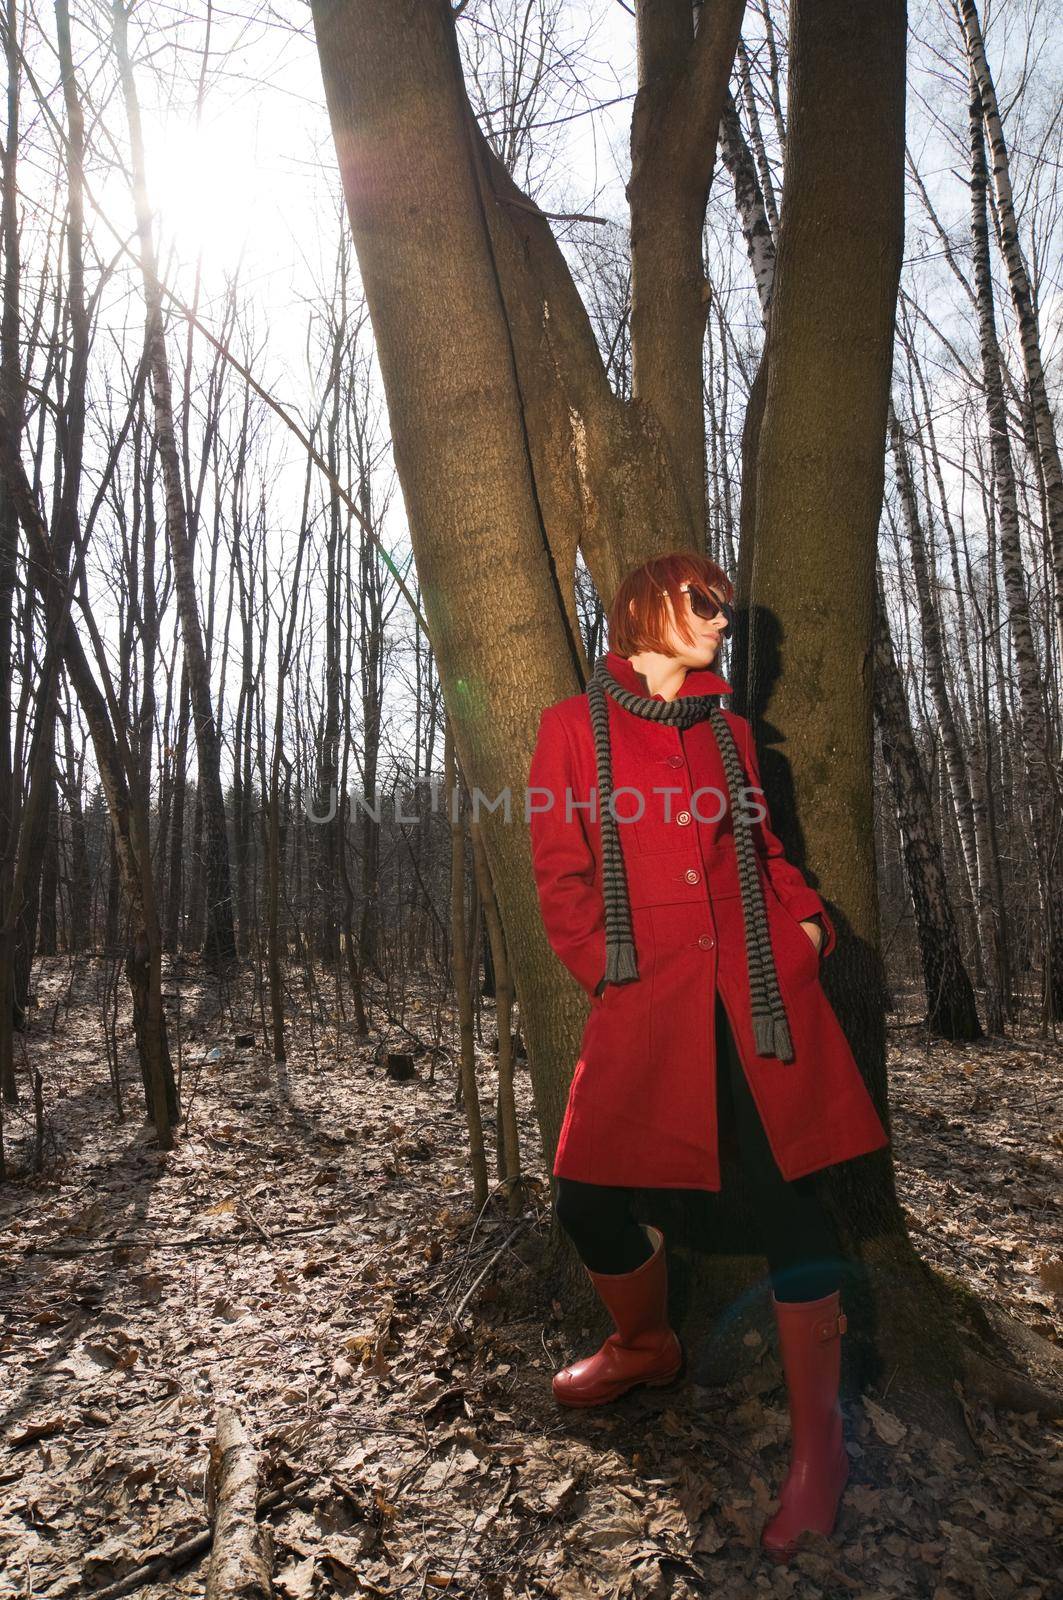 Beautiful girl wearing red coat and boots walking in the early spring